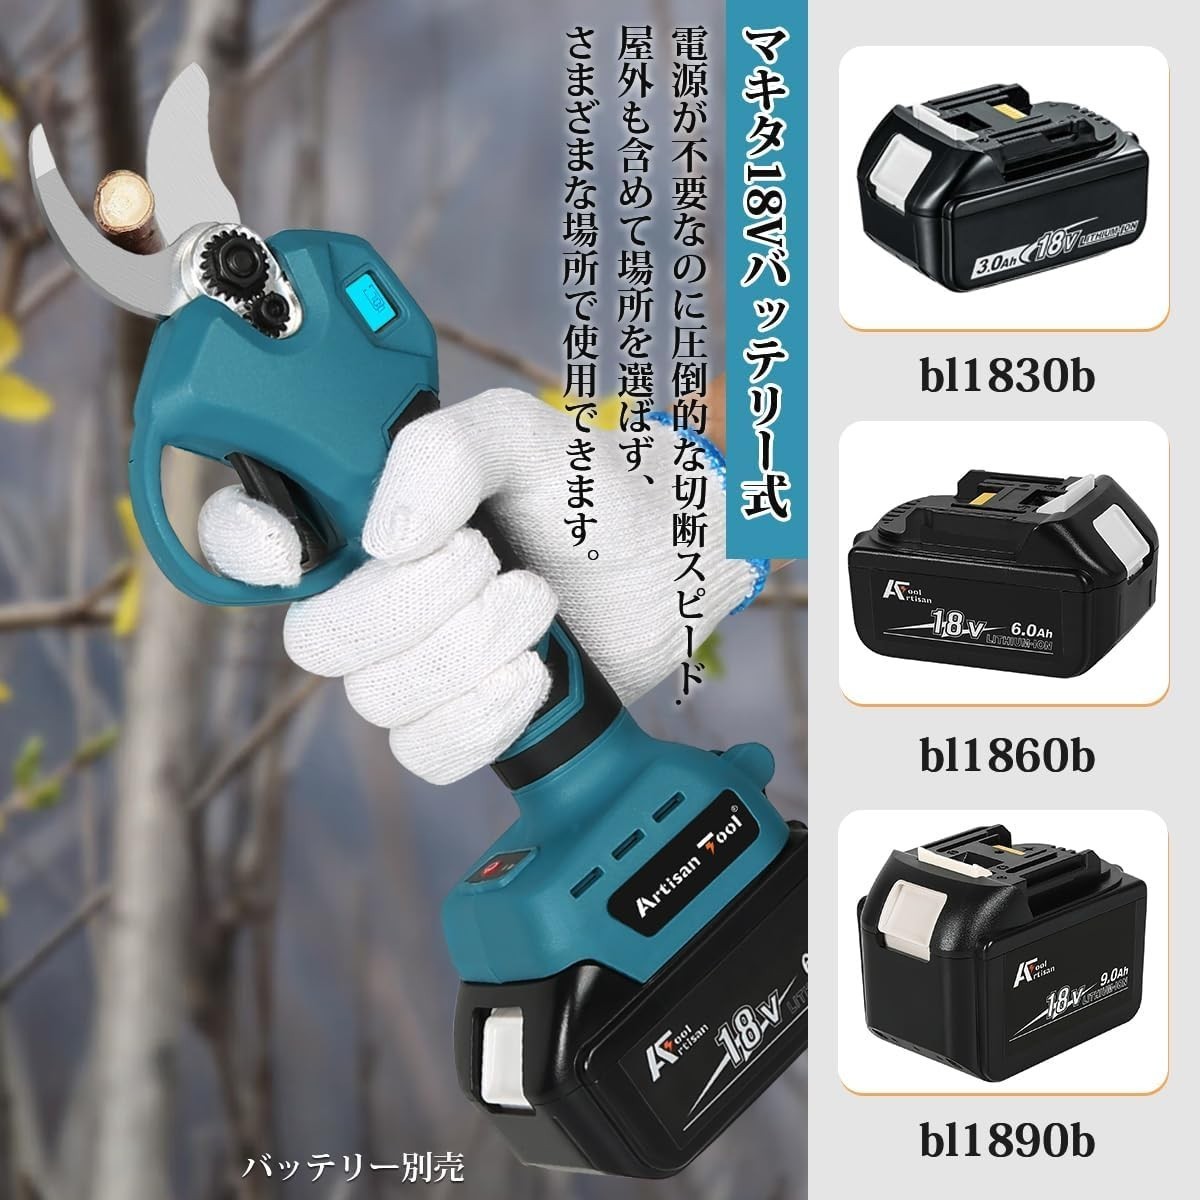  cordless pruning scissors blue liquid crystal panel attaching brushless motor AT-PS03B Makita interchangeable Makita 18V BL1830 BL1860 etc. new system correspondence receipt possible 